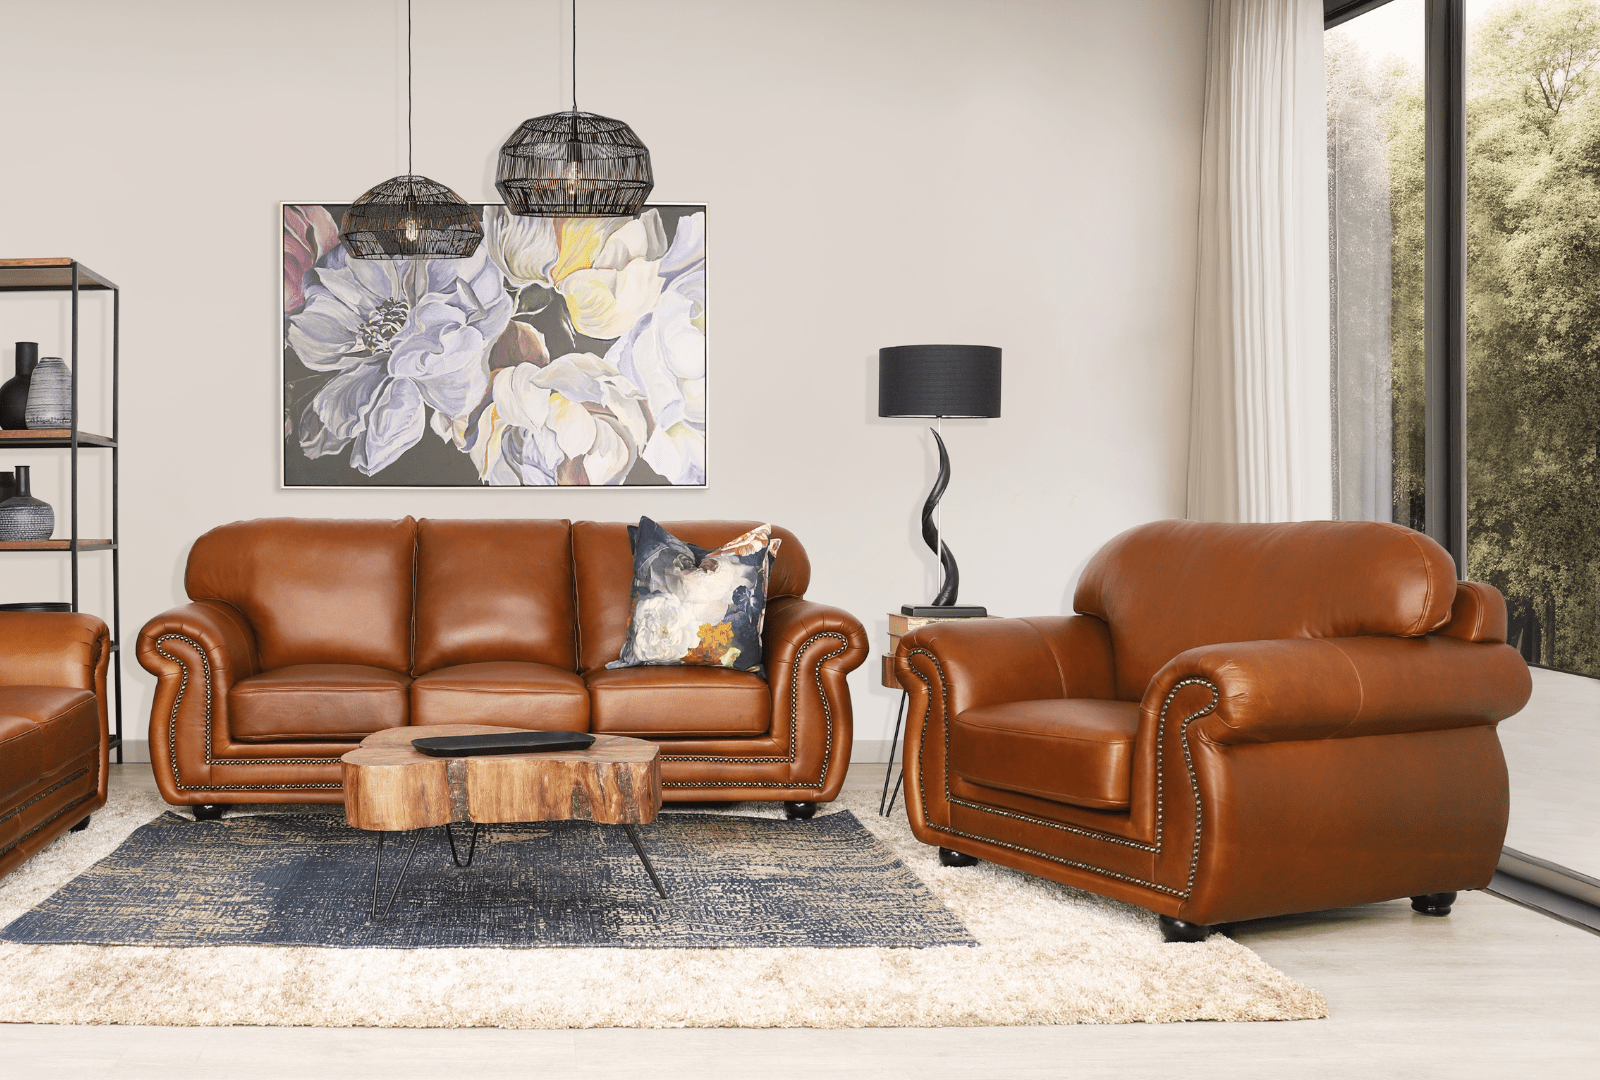 Illuminate Your Leather: How Lighting Transforms the Colours of Your Furniture